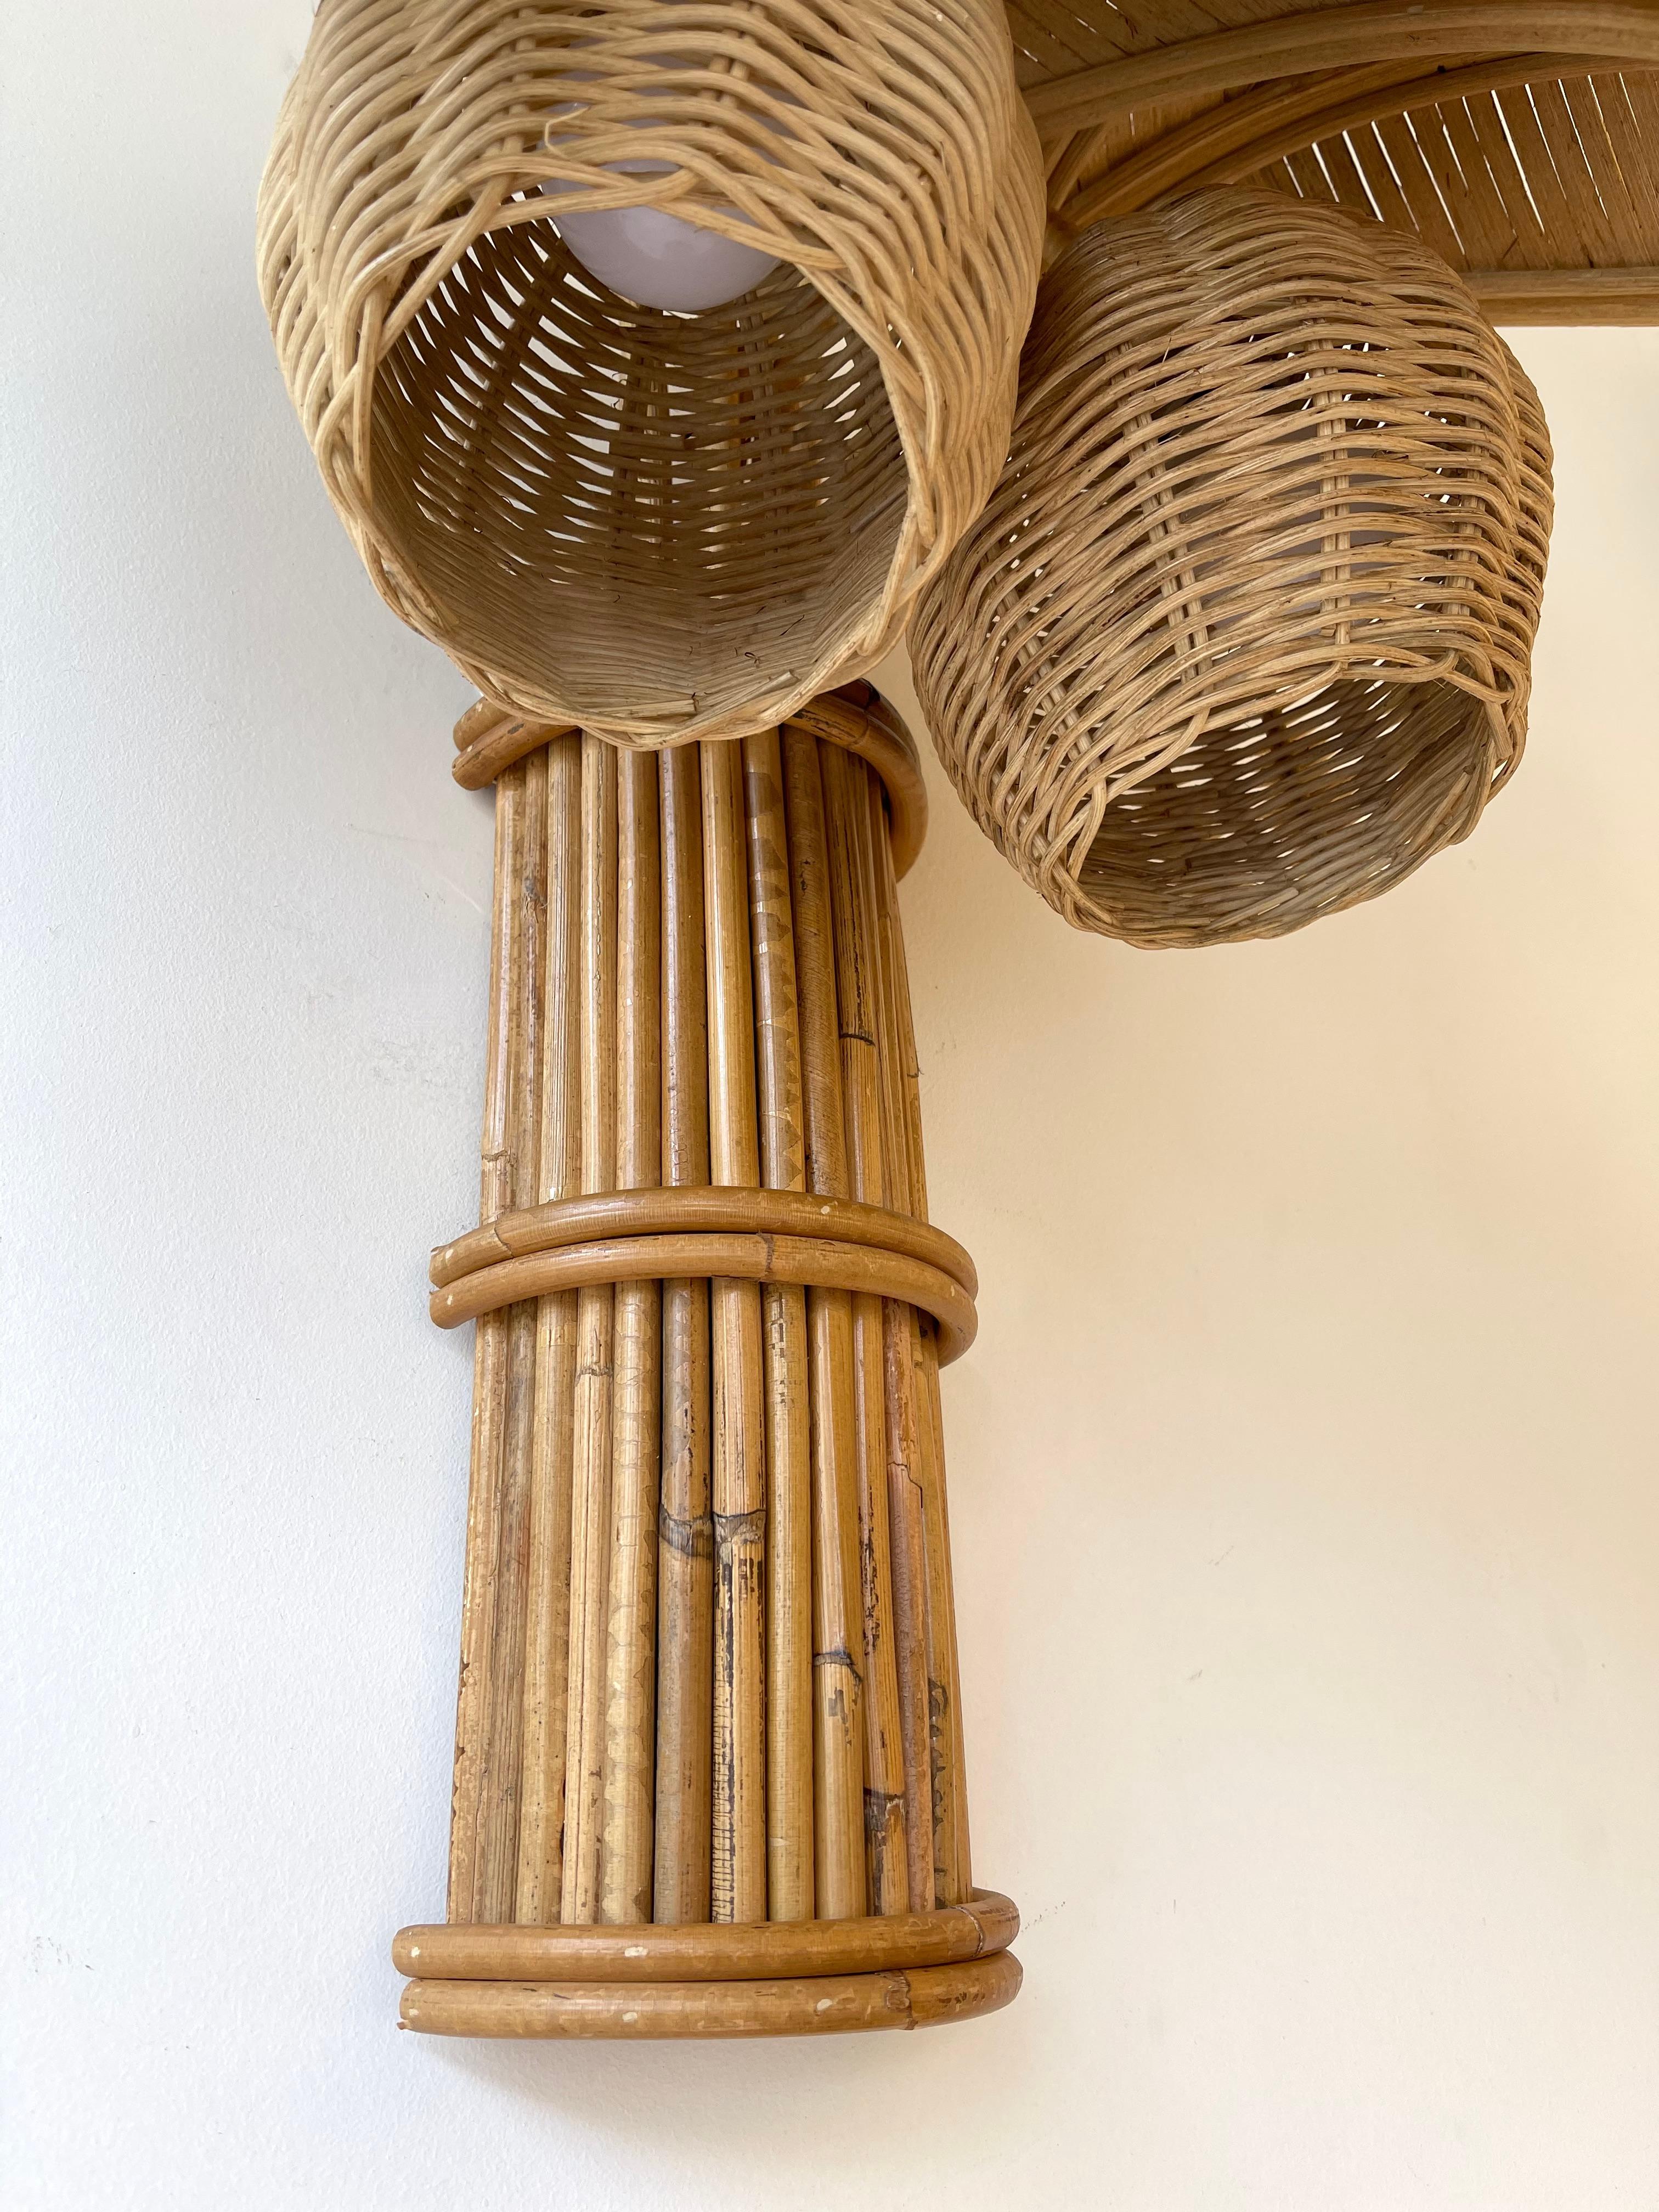 Pair of rattan wicker coconut palm tree wall lights lamps sconces. Artisanal work in  the style of Mario Lopez Torres, Galerie Maison & Jardin, Jansen, Dal Vera, Vivai Del Sud,  Hollywood Regency.

 